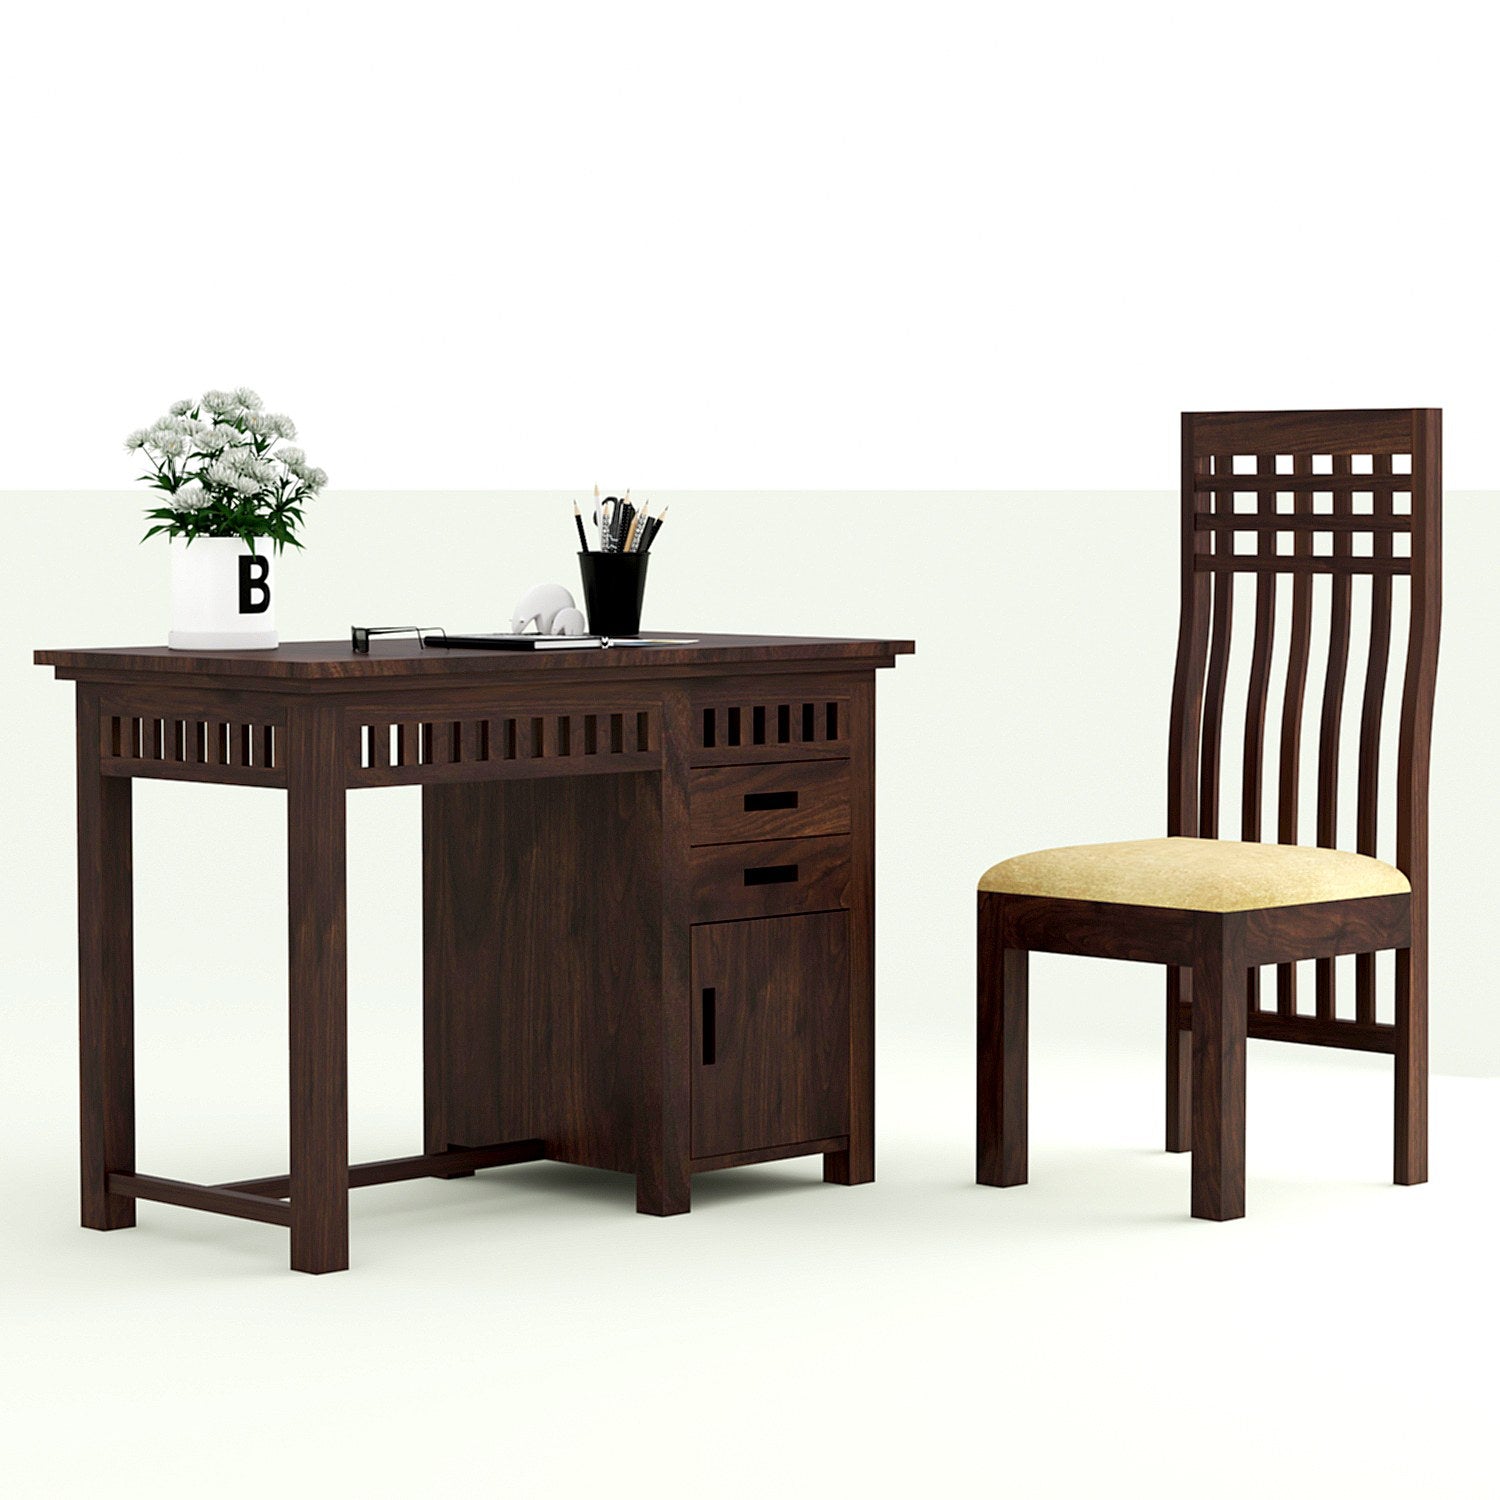 Amer Solid Wood Study Table With Chair For Home (Walnut Finish)